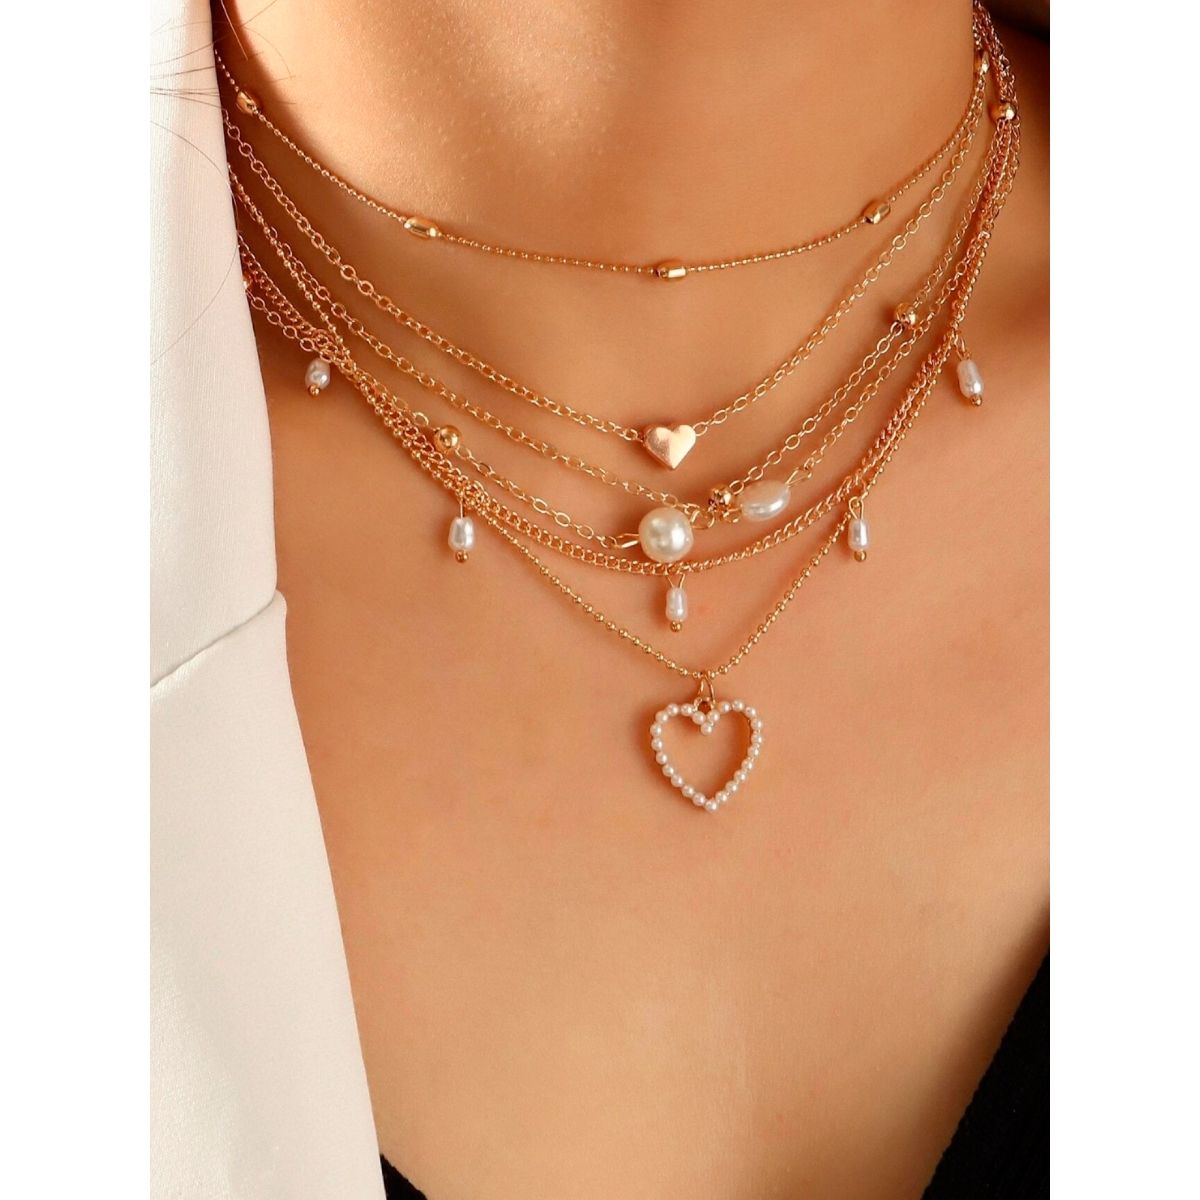 Dropship 15PCS Layered Choker Necklace For Women Multilayer Adjustable  Chain Necklace Set With Lock Coin Heart Handmade Pendant Necklace For Girls  Gift to Sell Online at a Lower Price | Doba